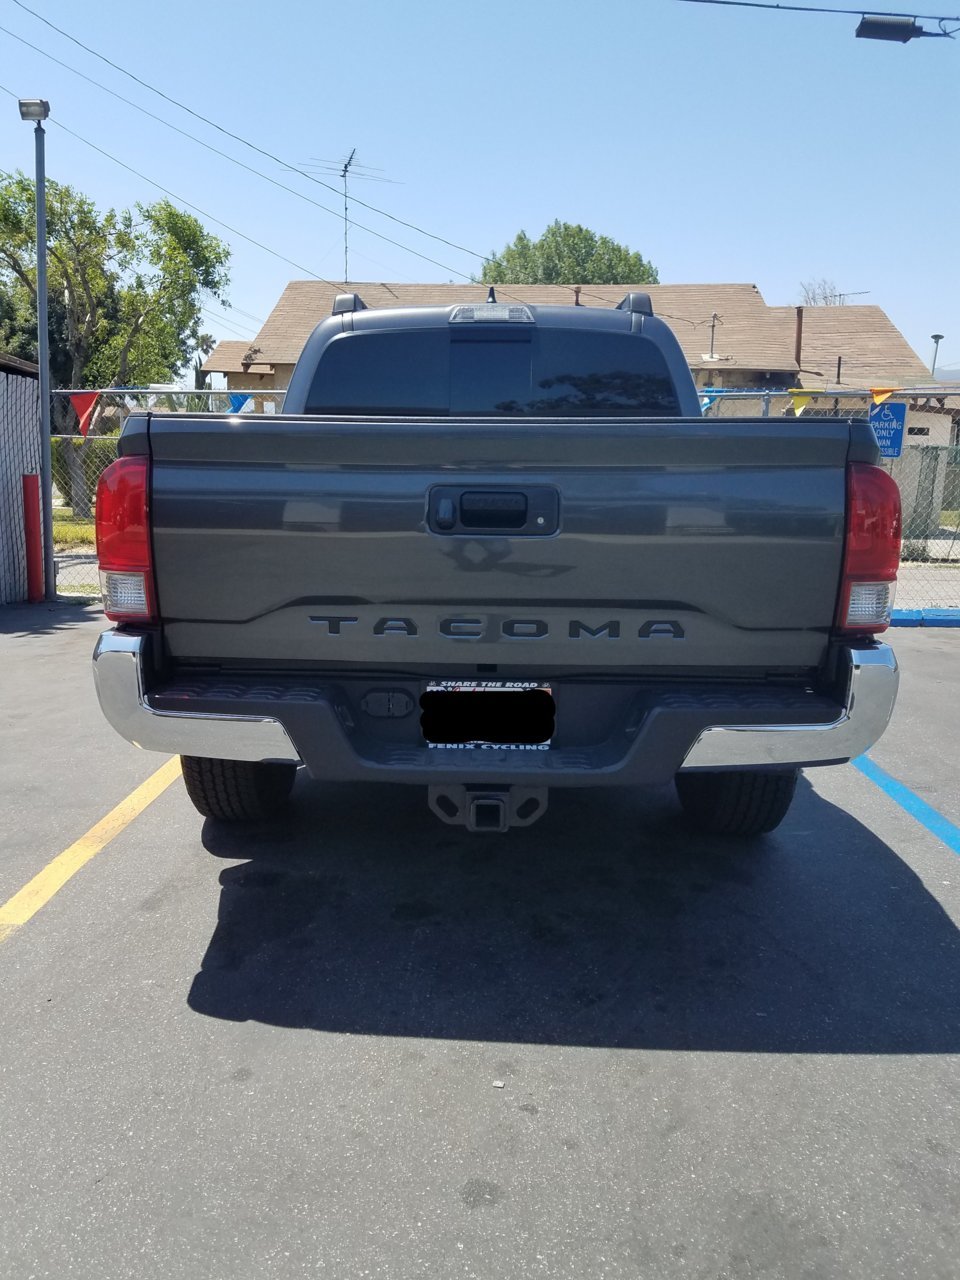 3D Tacoma Letters.jpg